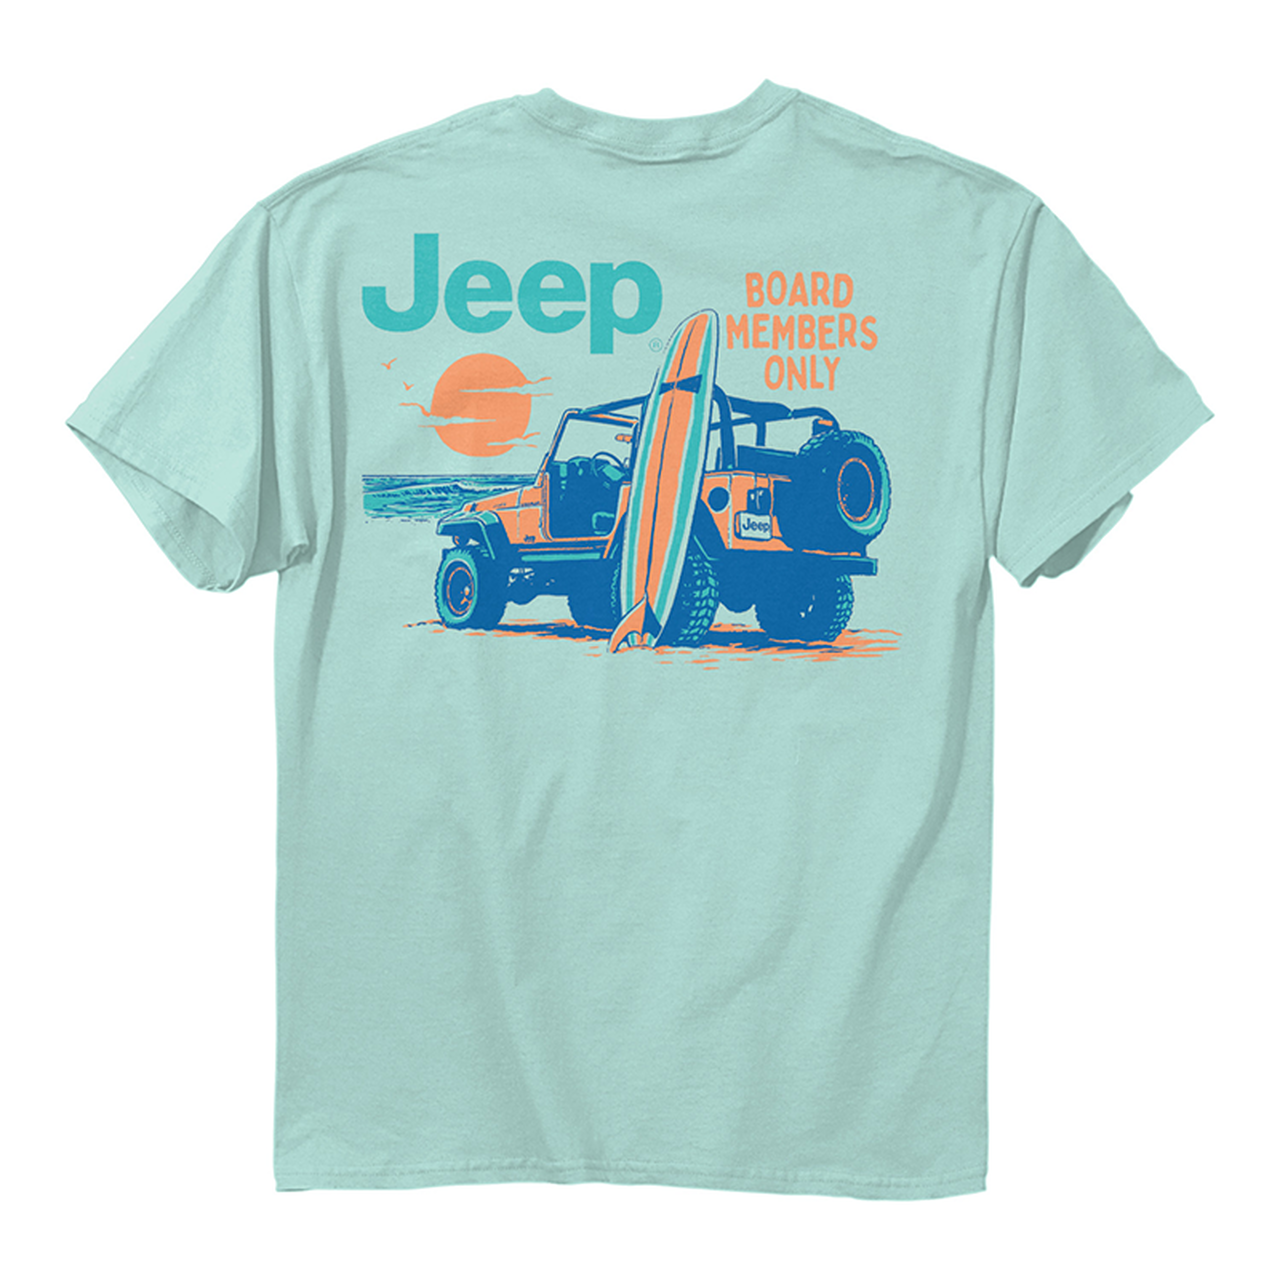 Jeep Board Members Only T-Shirt